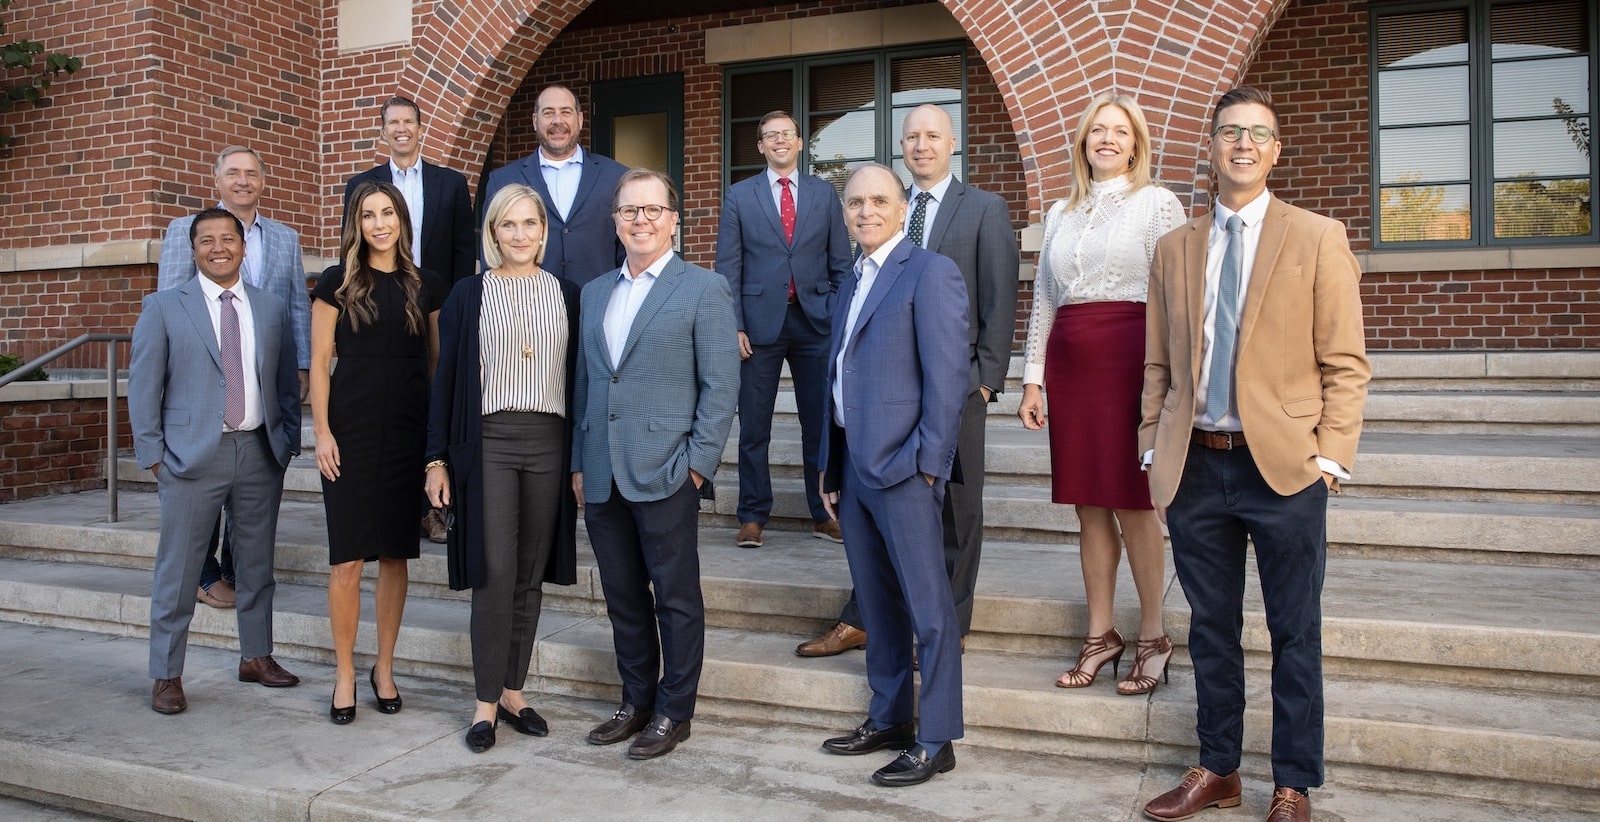 2021 Builder of the Year Ivory Homes' leadership team